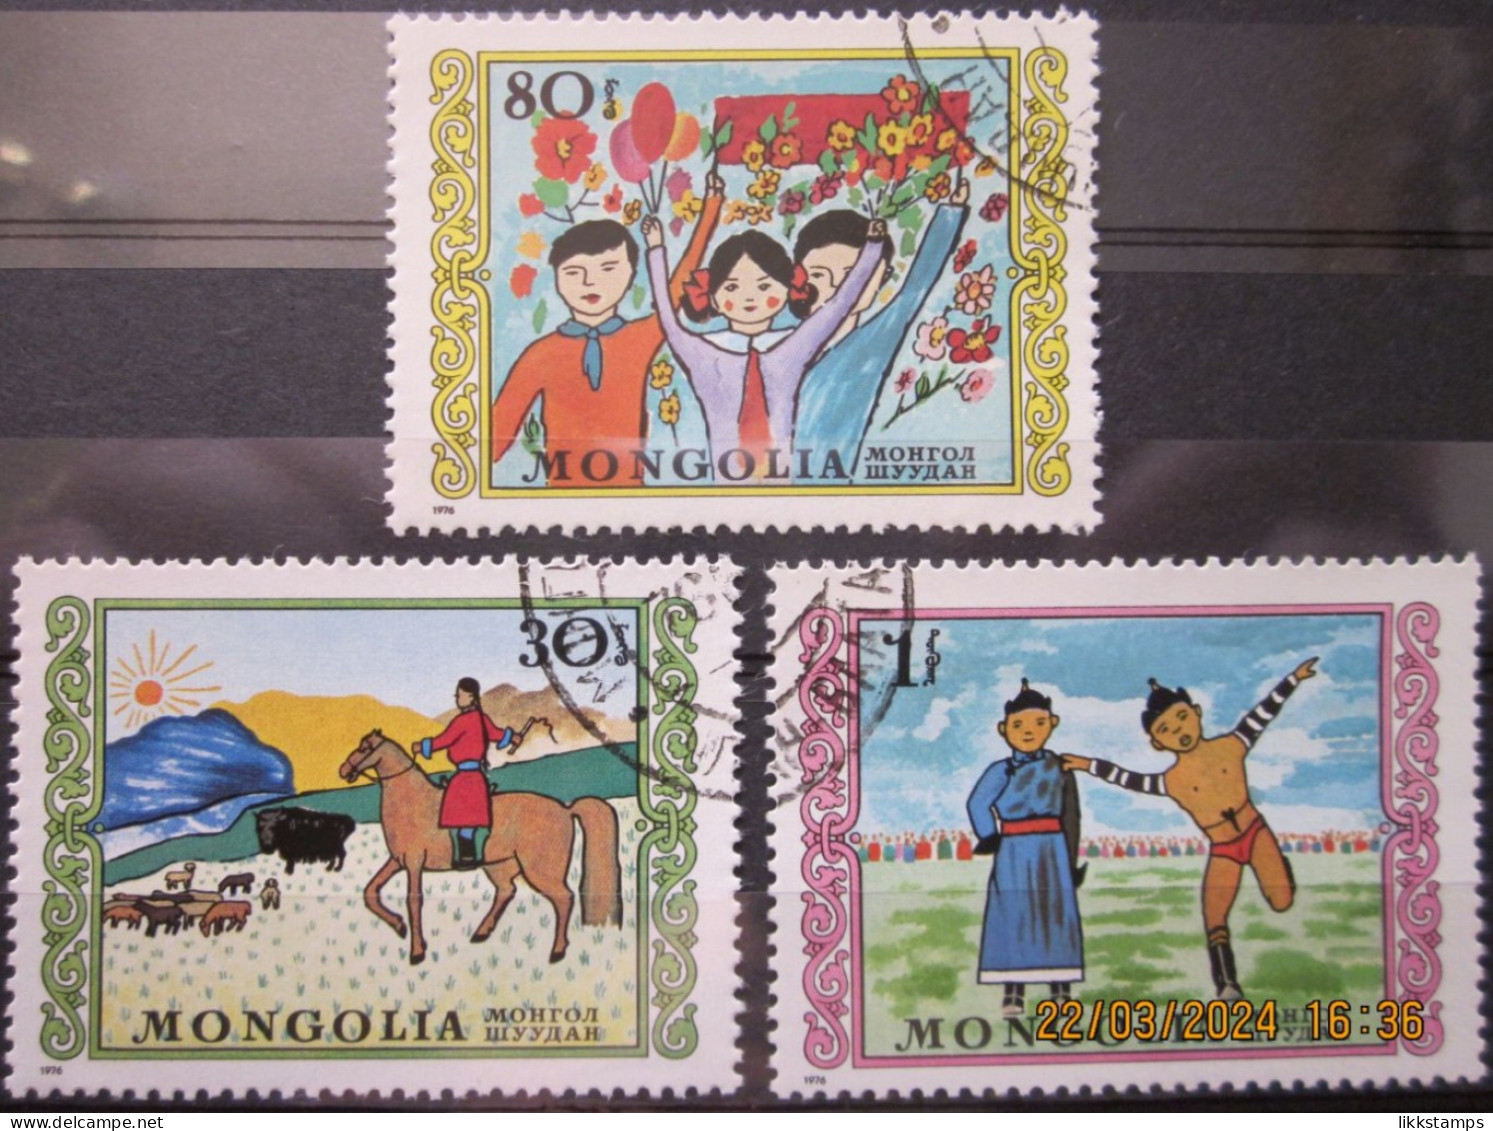 MONGOLIA ~ 1976 ~ S.G. NUMBERS 981 + 984 - 985, ~ CHILDRENS DAY. ~ VFU #03477 - Mongolie